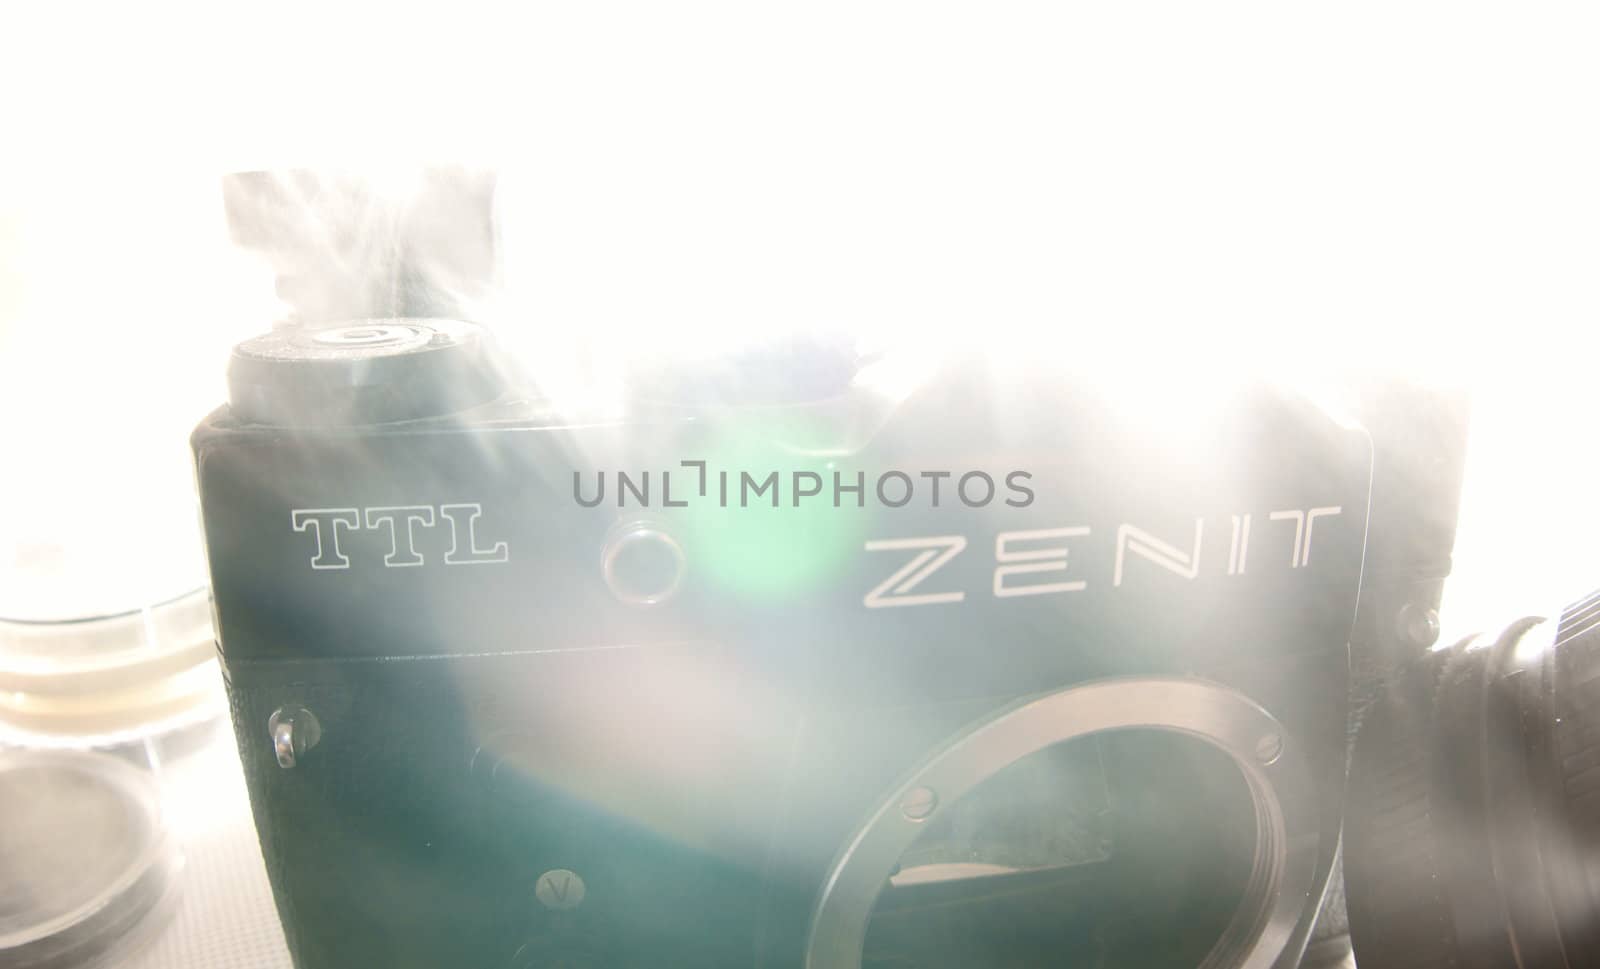 Old Zenit and photo accessories